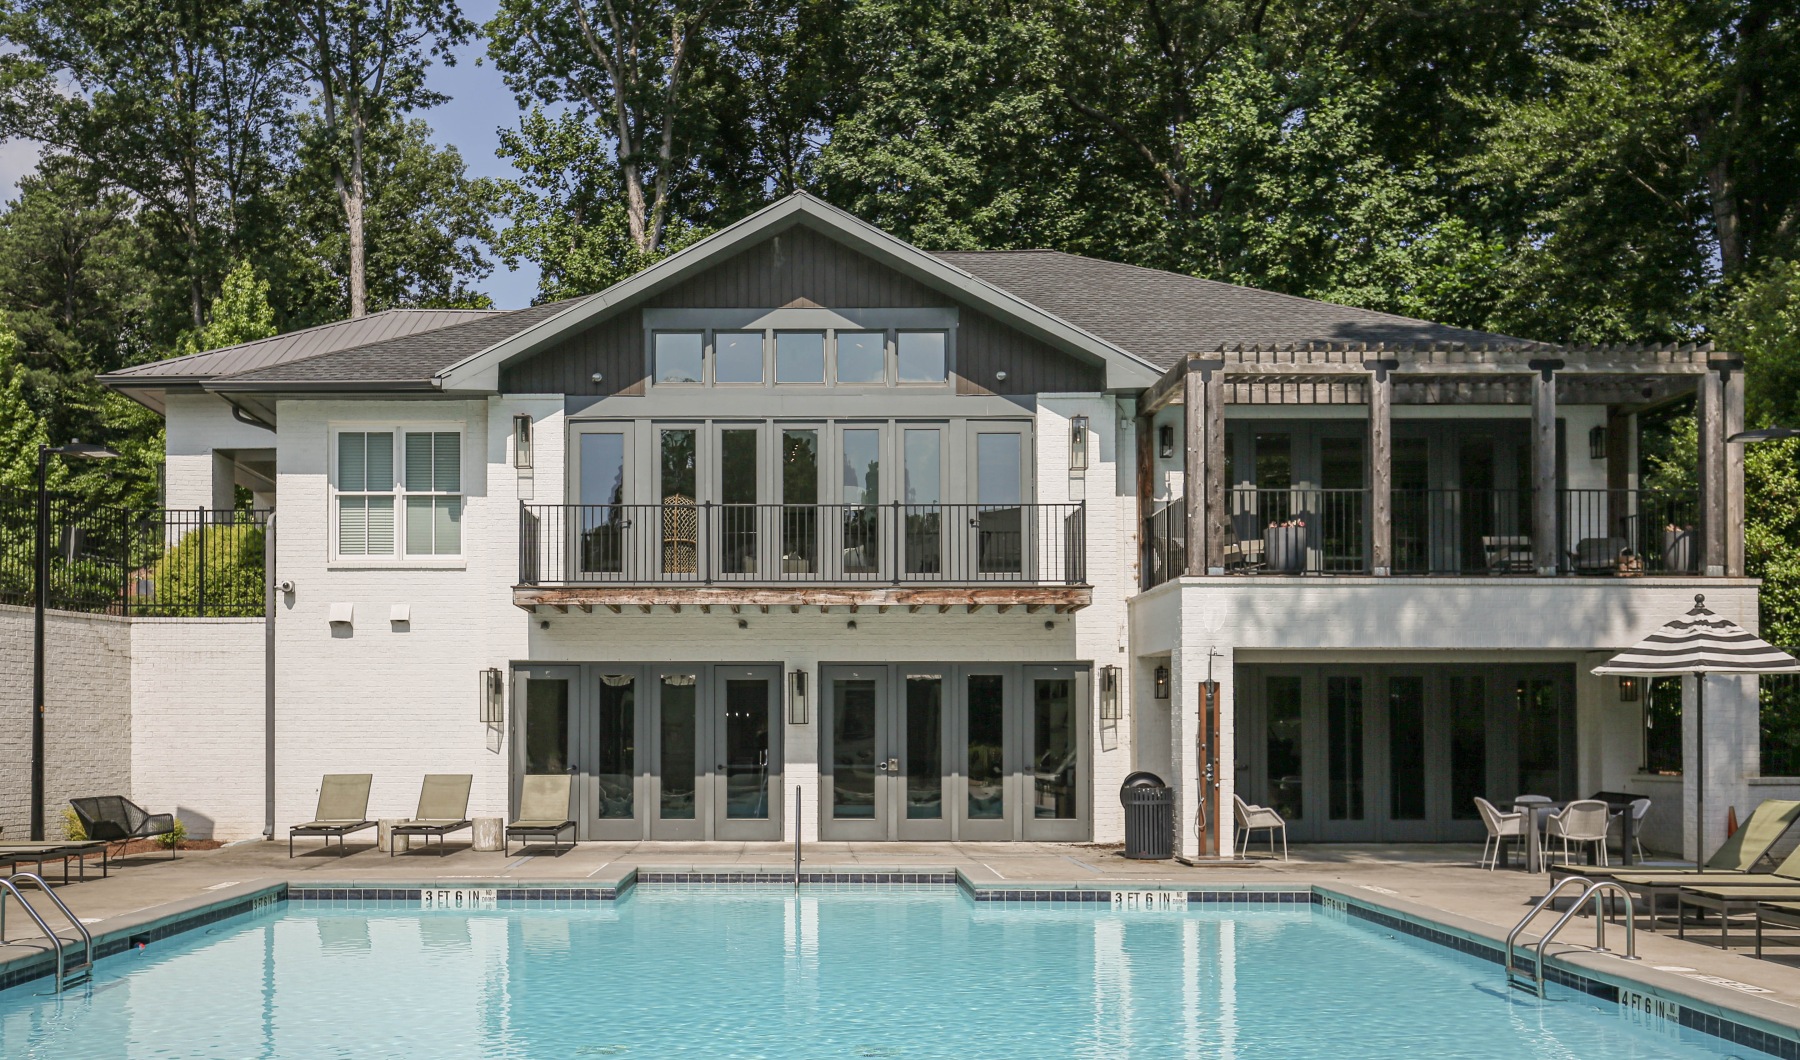 Apartment clubhouse facing pool